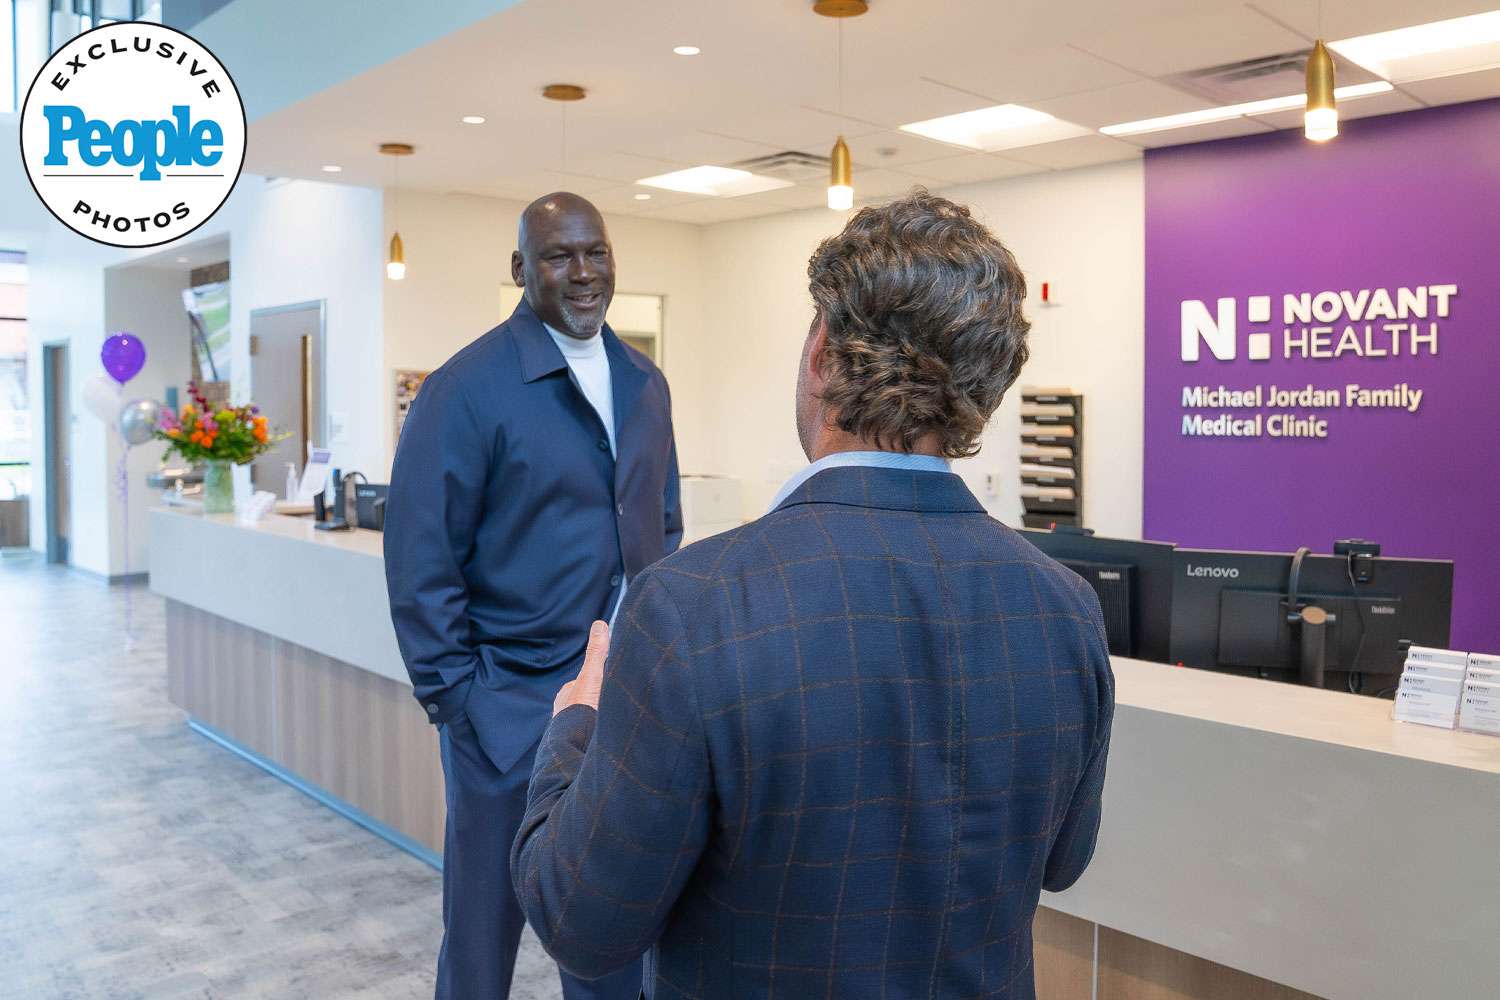  Michael Jordan Celebrates Opening of New N.C. Health Clinic After $10M Donation — See the Photo (Exclusive) 